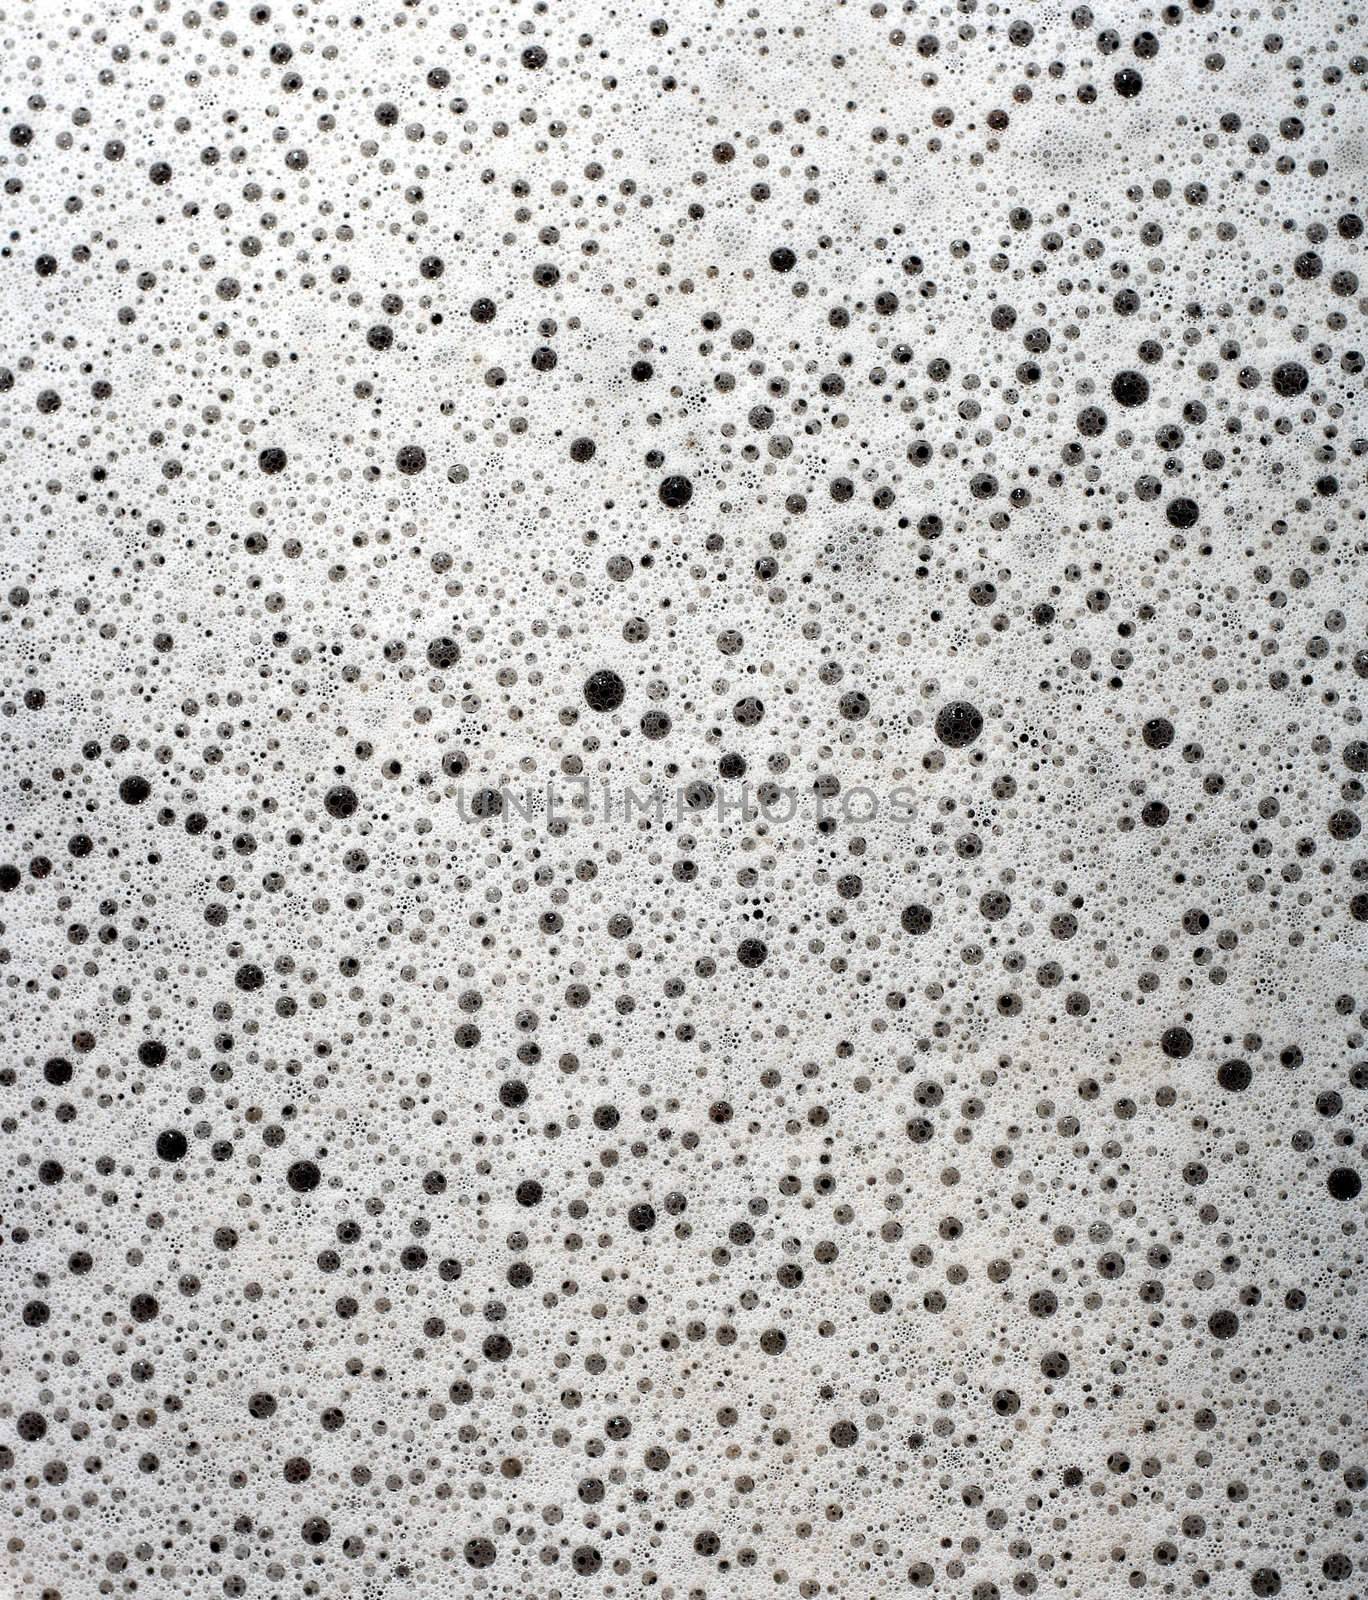 Bubbles of dirty soapy water background.